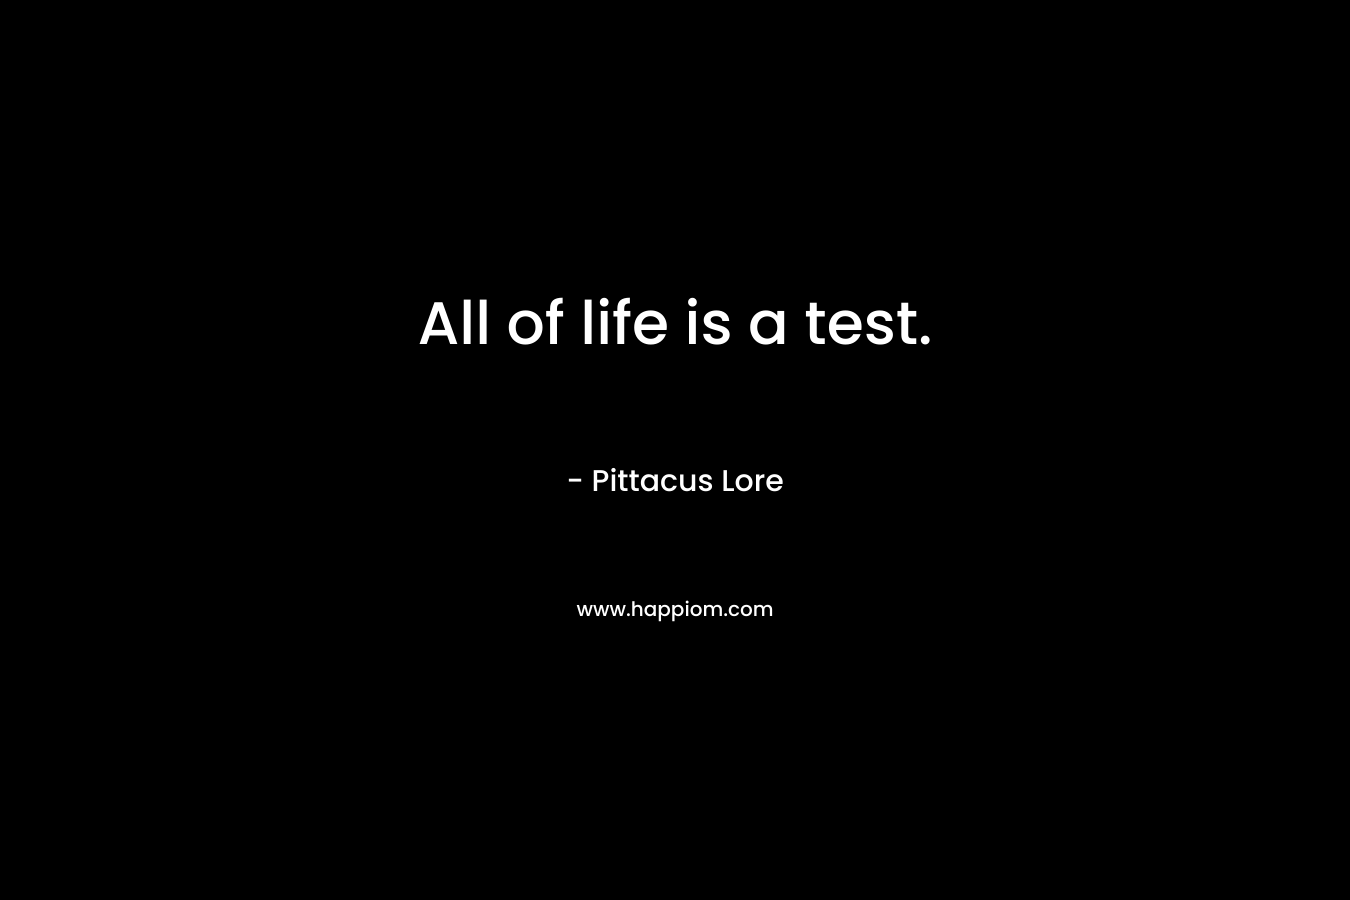 All of life is a test. – Pittacus Lore